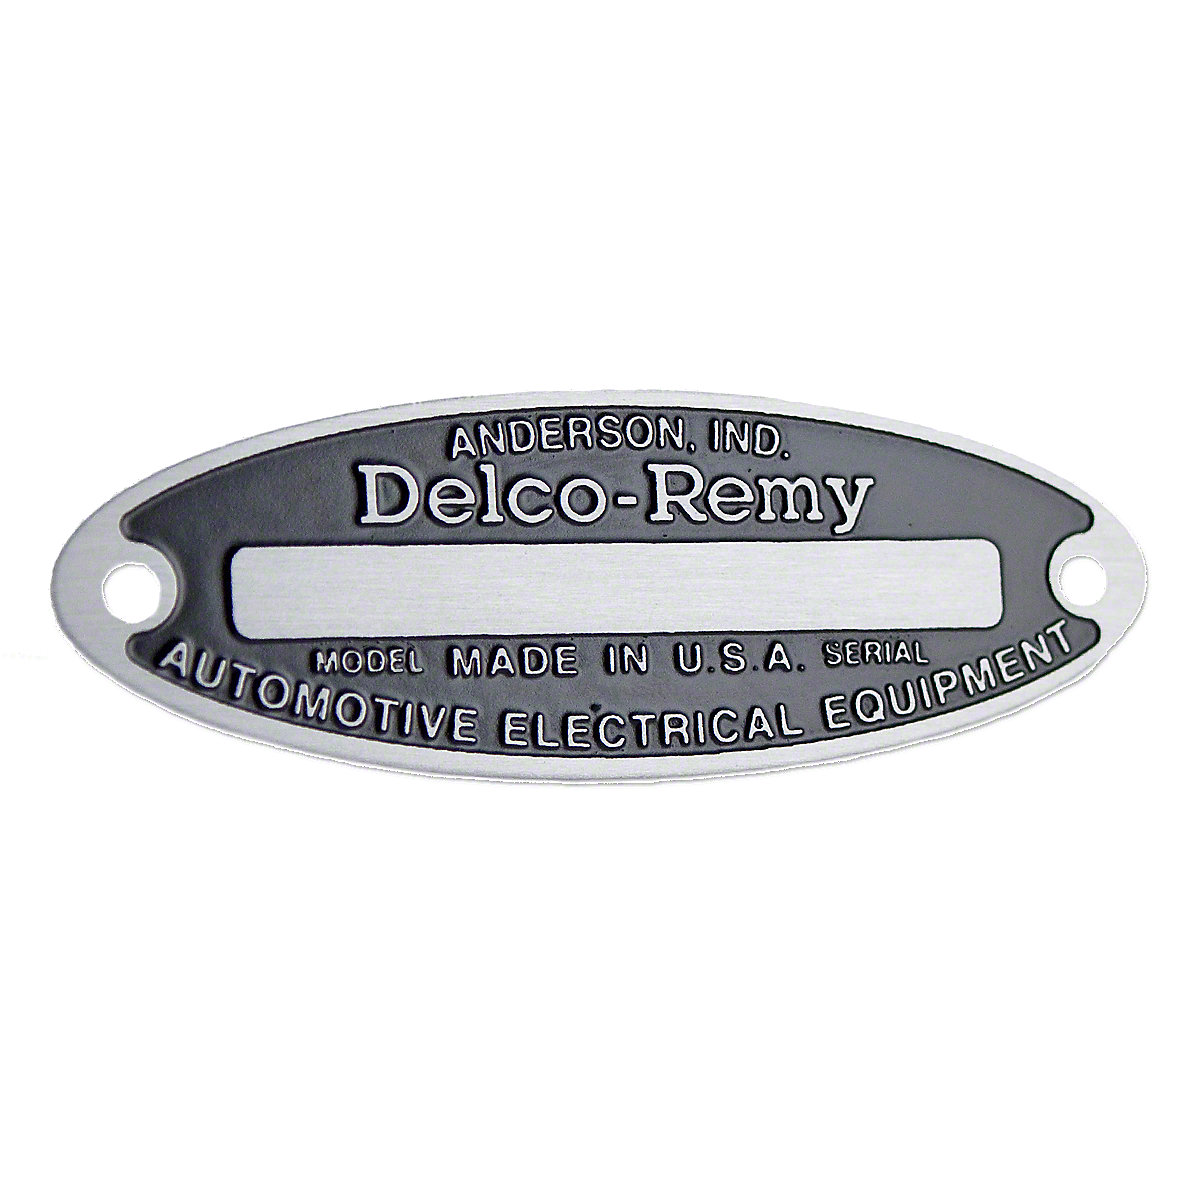 2 Rivet Delco Remy Starter Tag For Allis Chalmers Tractors